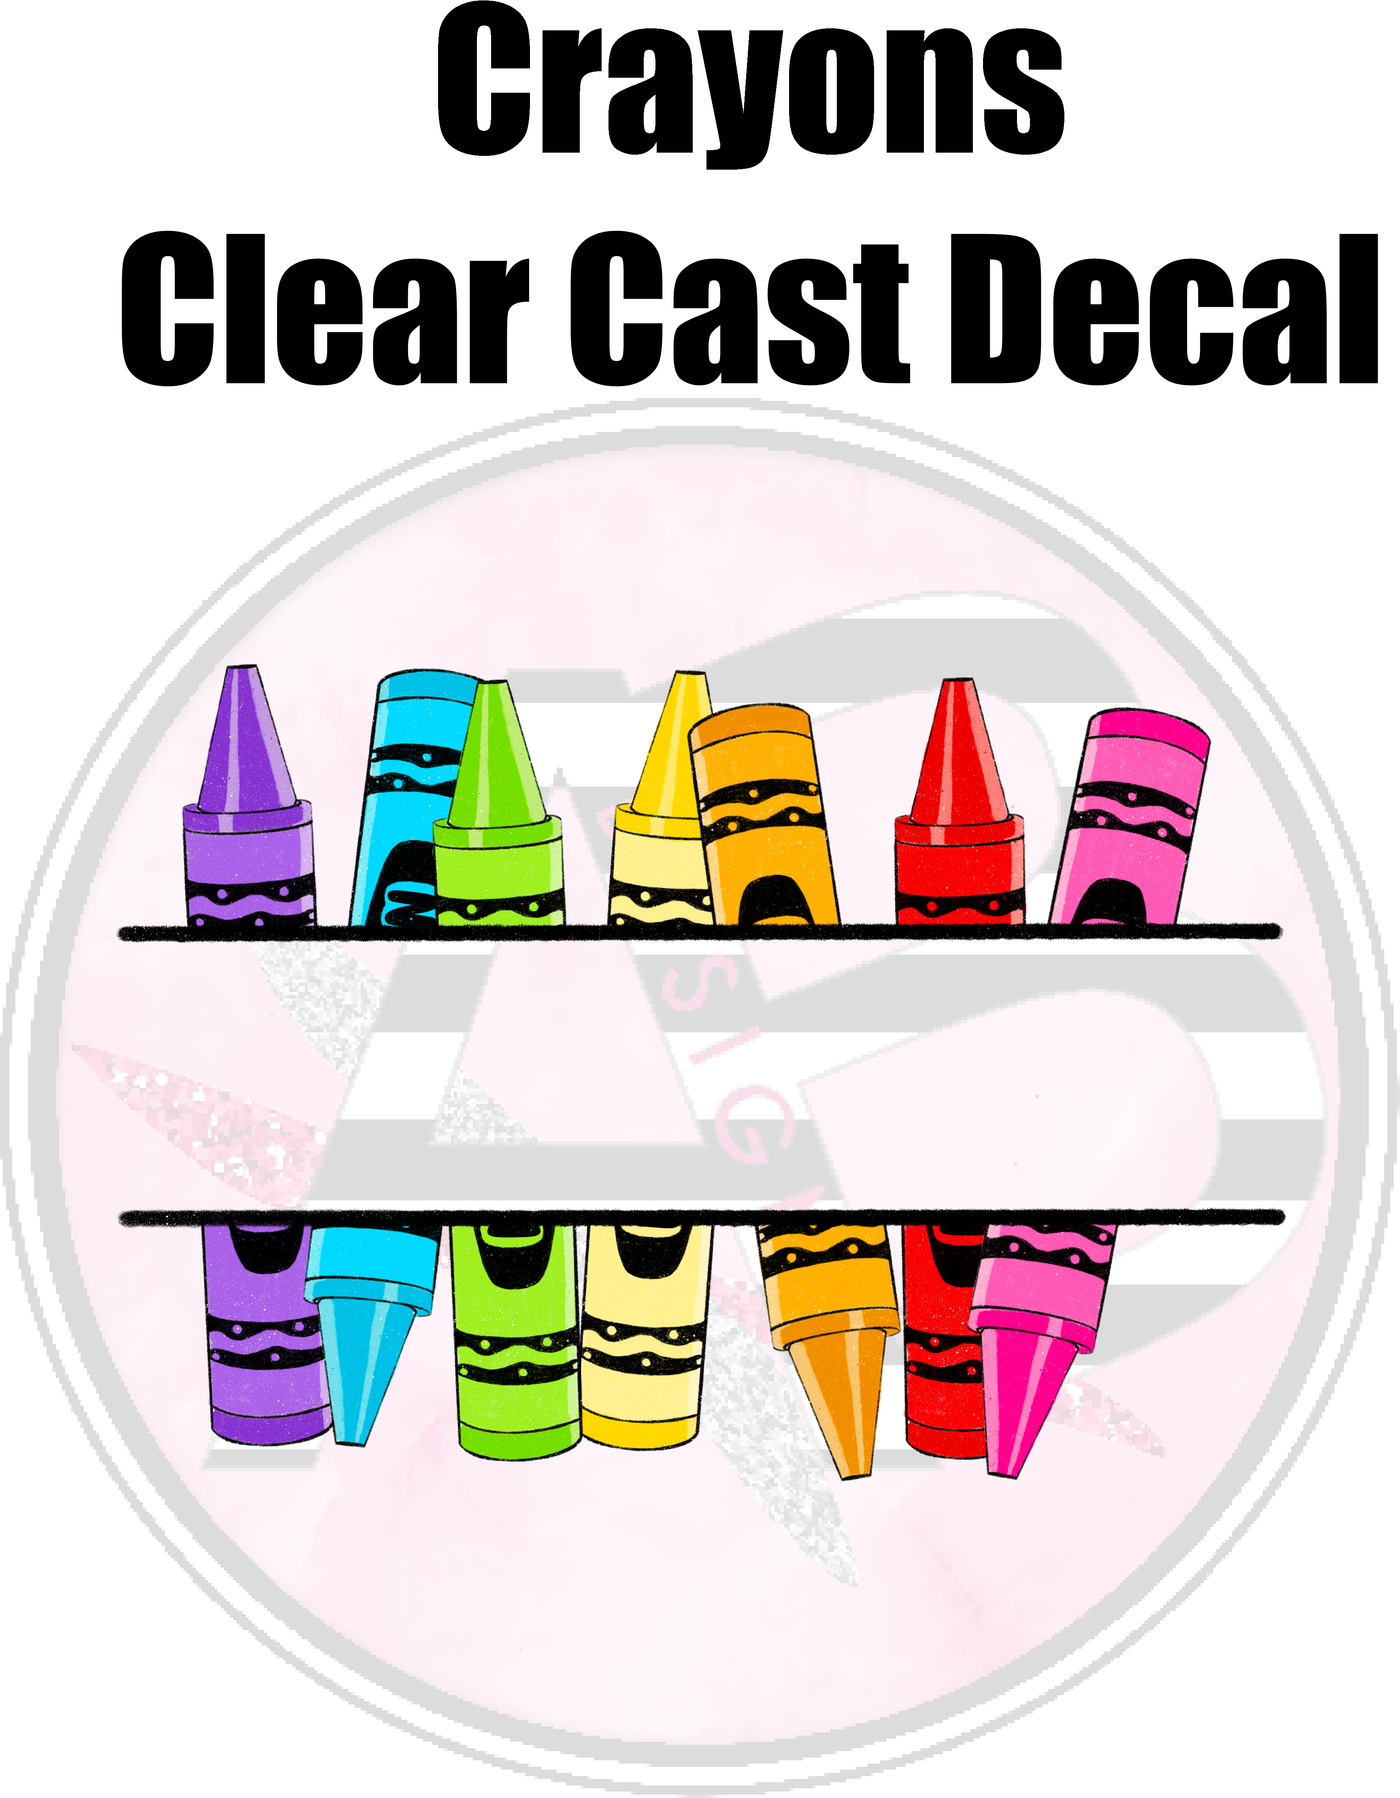 Crayons 01 - Clear Cast Decal